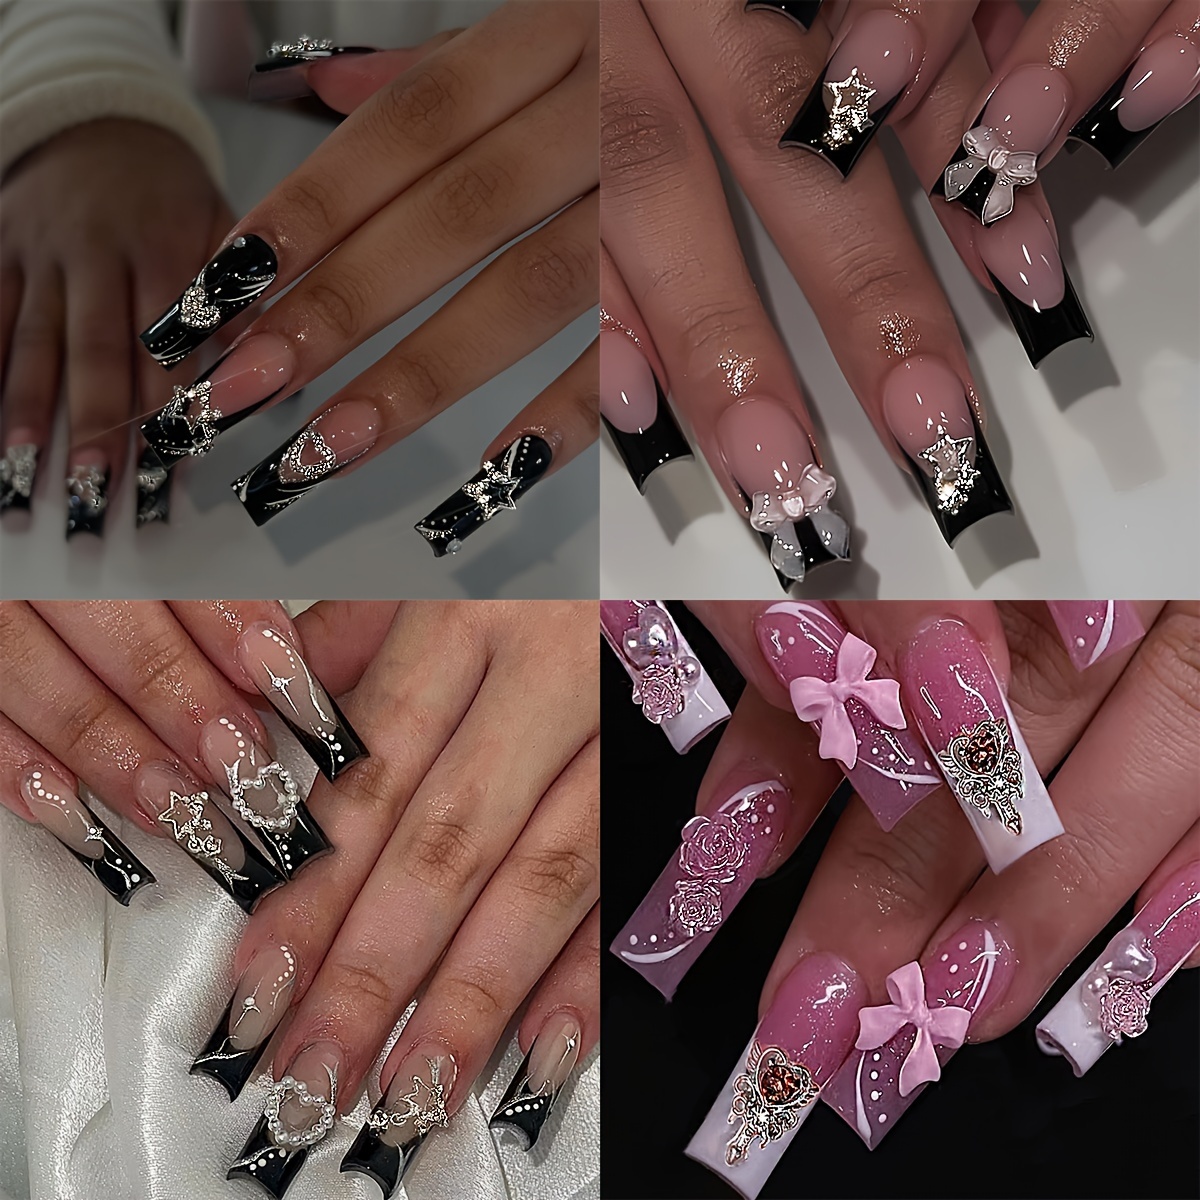 

4 Packs (96 Pcs) Glossy Long Square Press On Nails, Black And Pink French Tip Fake Nails With 3d Bow, Star Heart Rhinestone Pearl Design, Sweet Cool Y2k False Nails For Women Girls